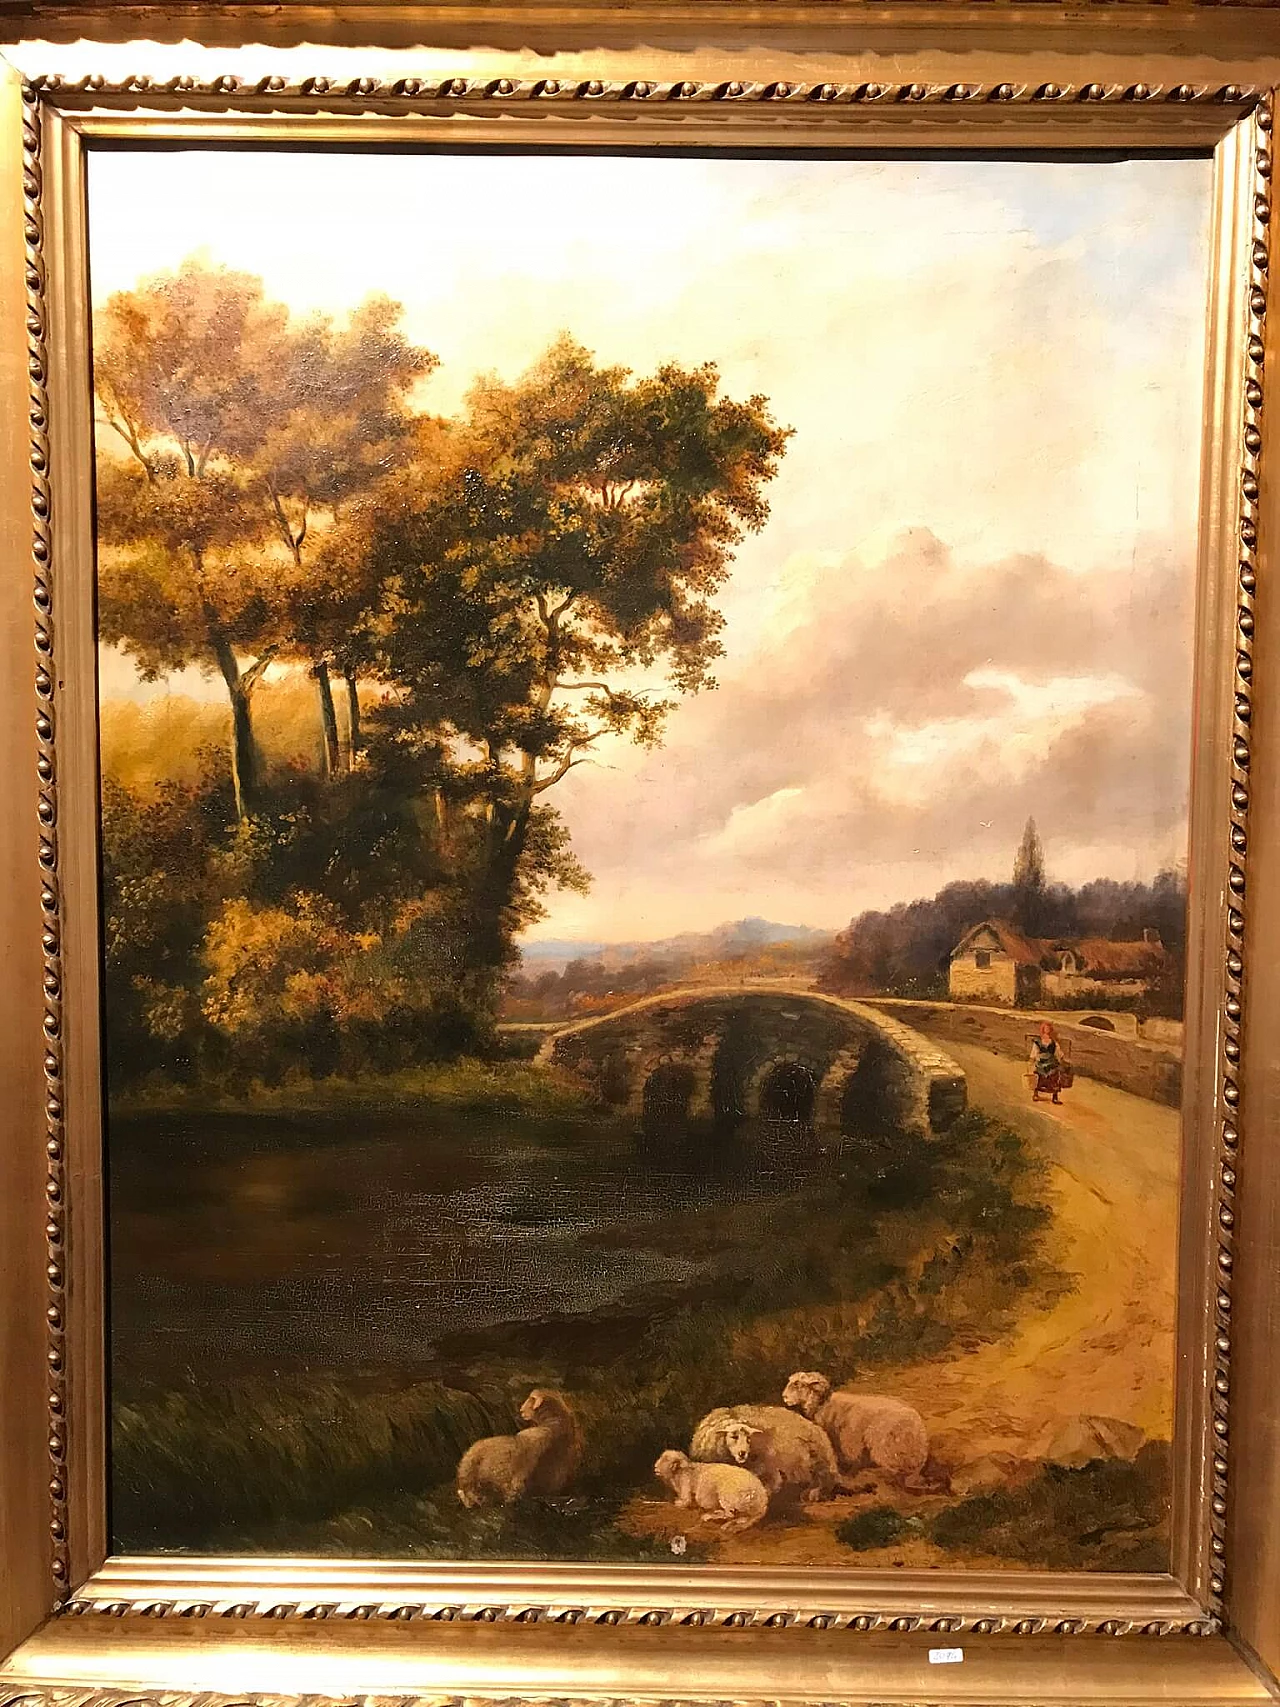 Oil painting on canvas with bucolic landscape, '800 1175903